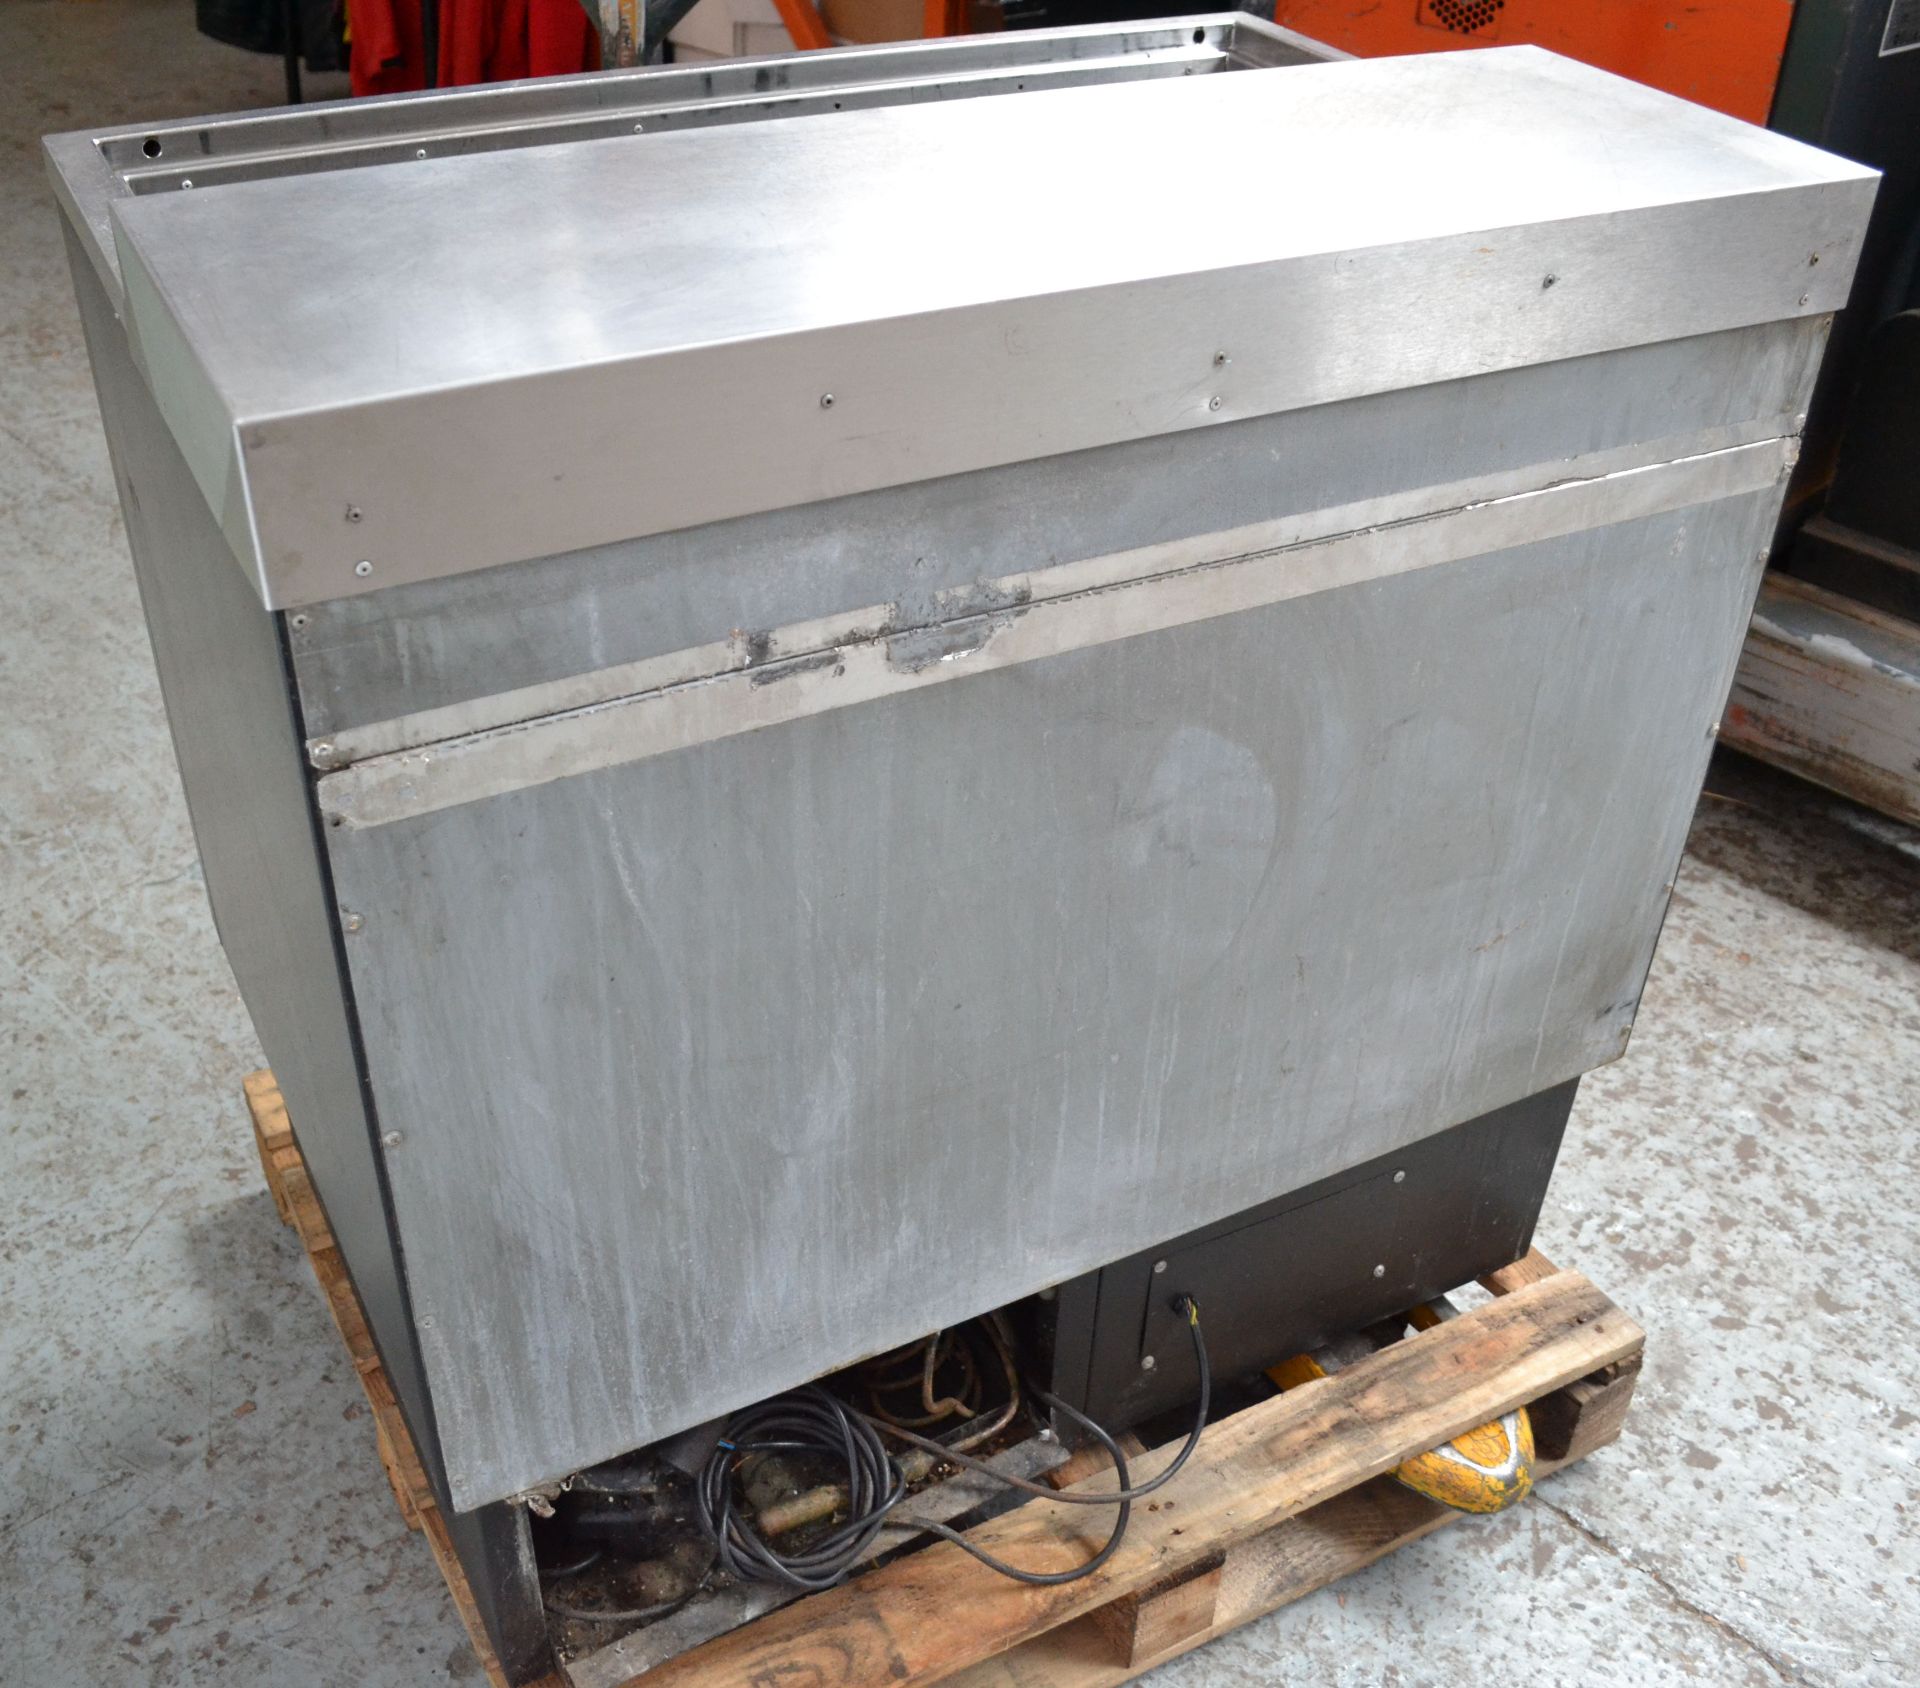 1 x IMC BK90 Series 2 Top Loading Bottle Cooler - Ref :NCE003 - CL007 - Location: Altrincham - Image 15 of 17